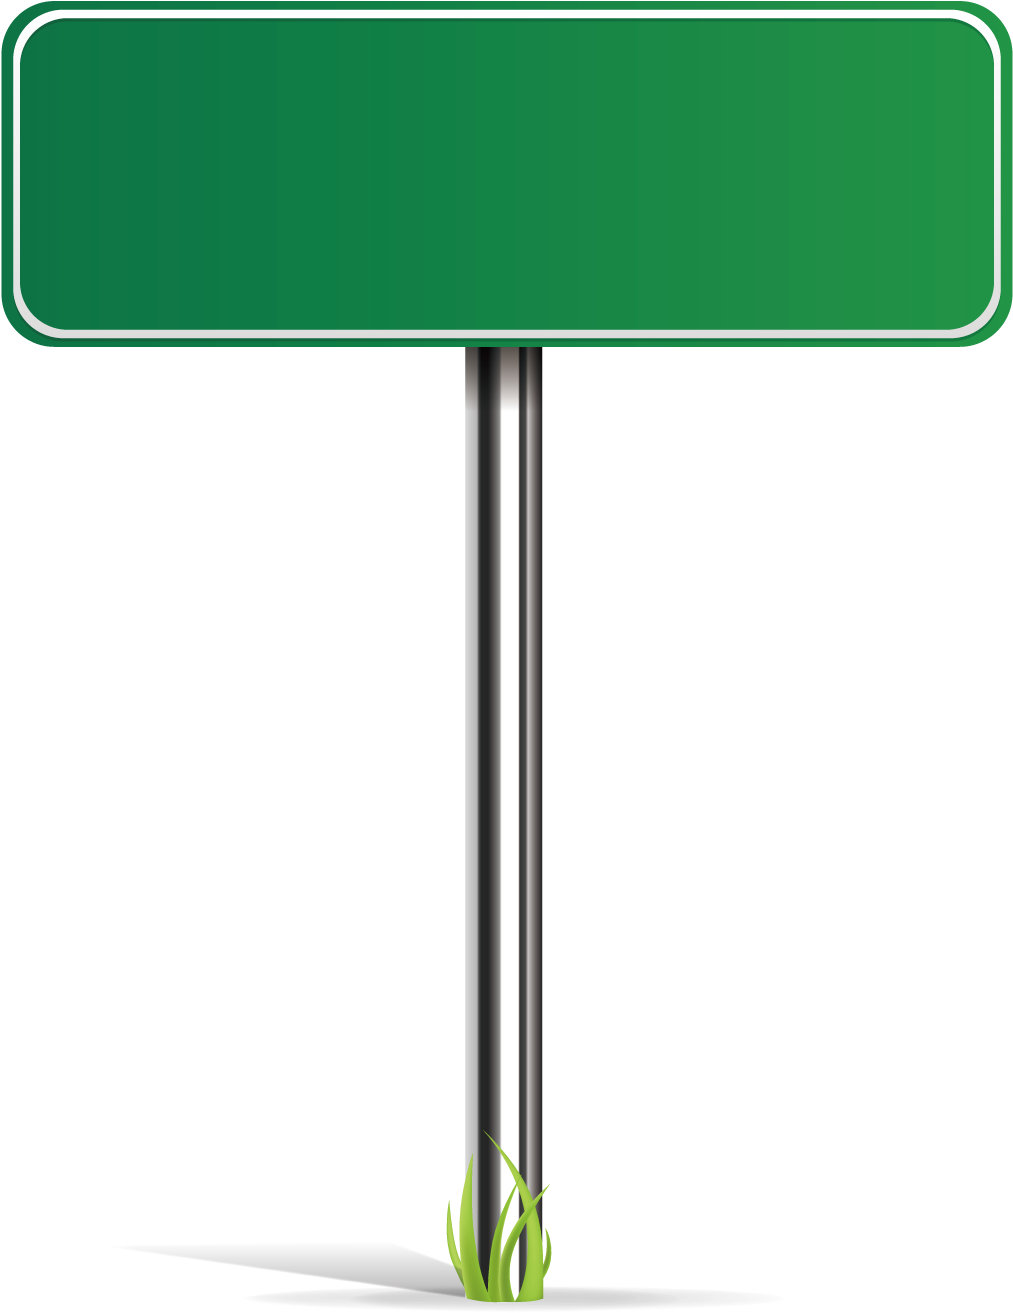 Download Vector Green Road Sign - Vector Graphics PNG Image with No  Background 